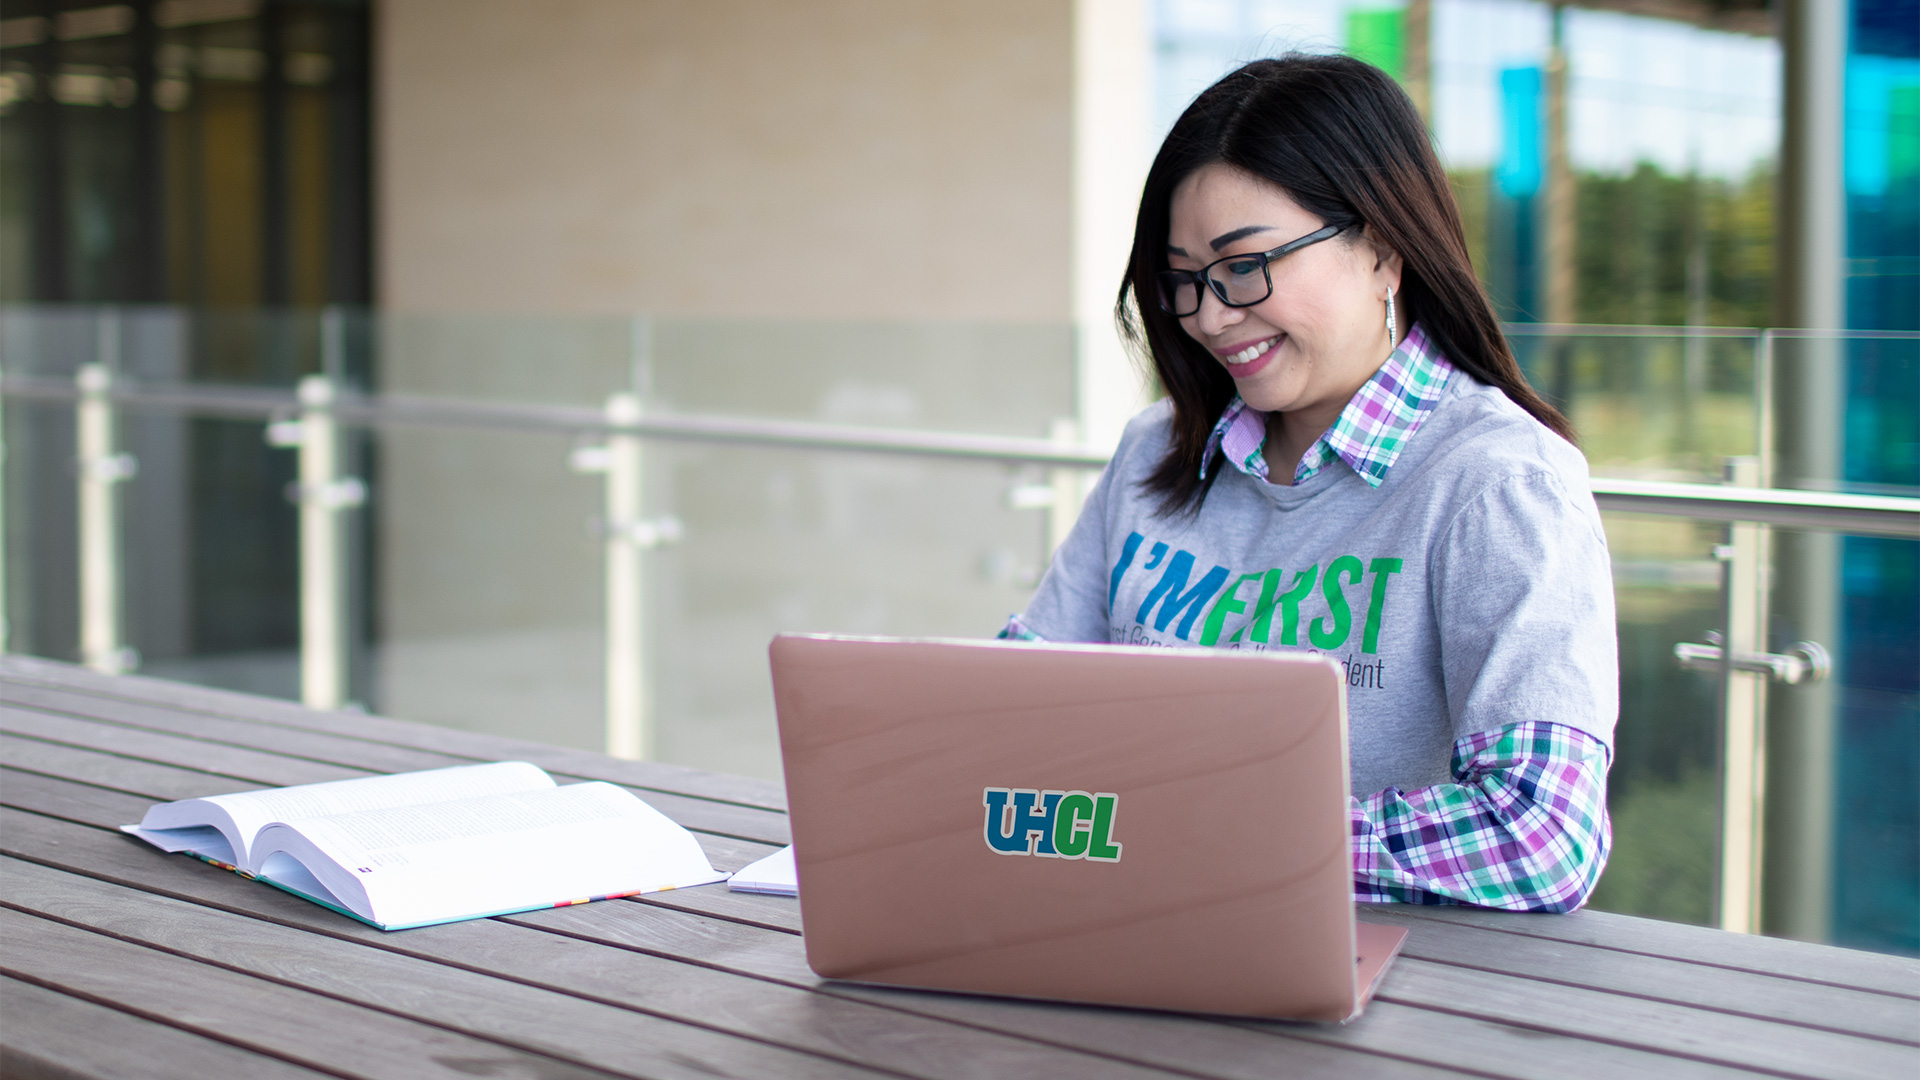 UHCL students on campus